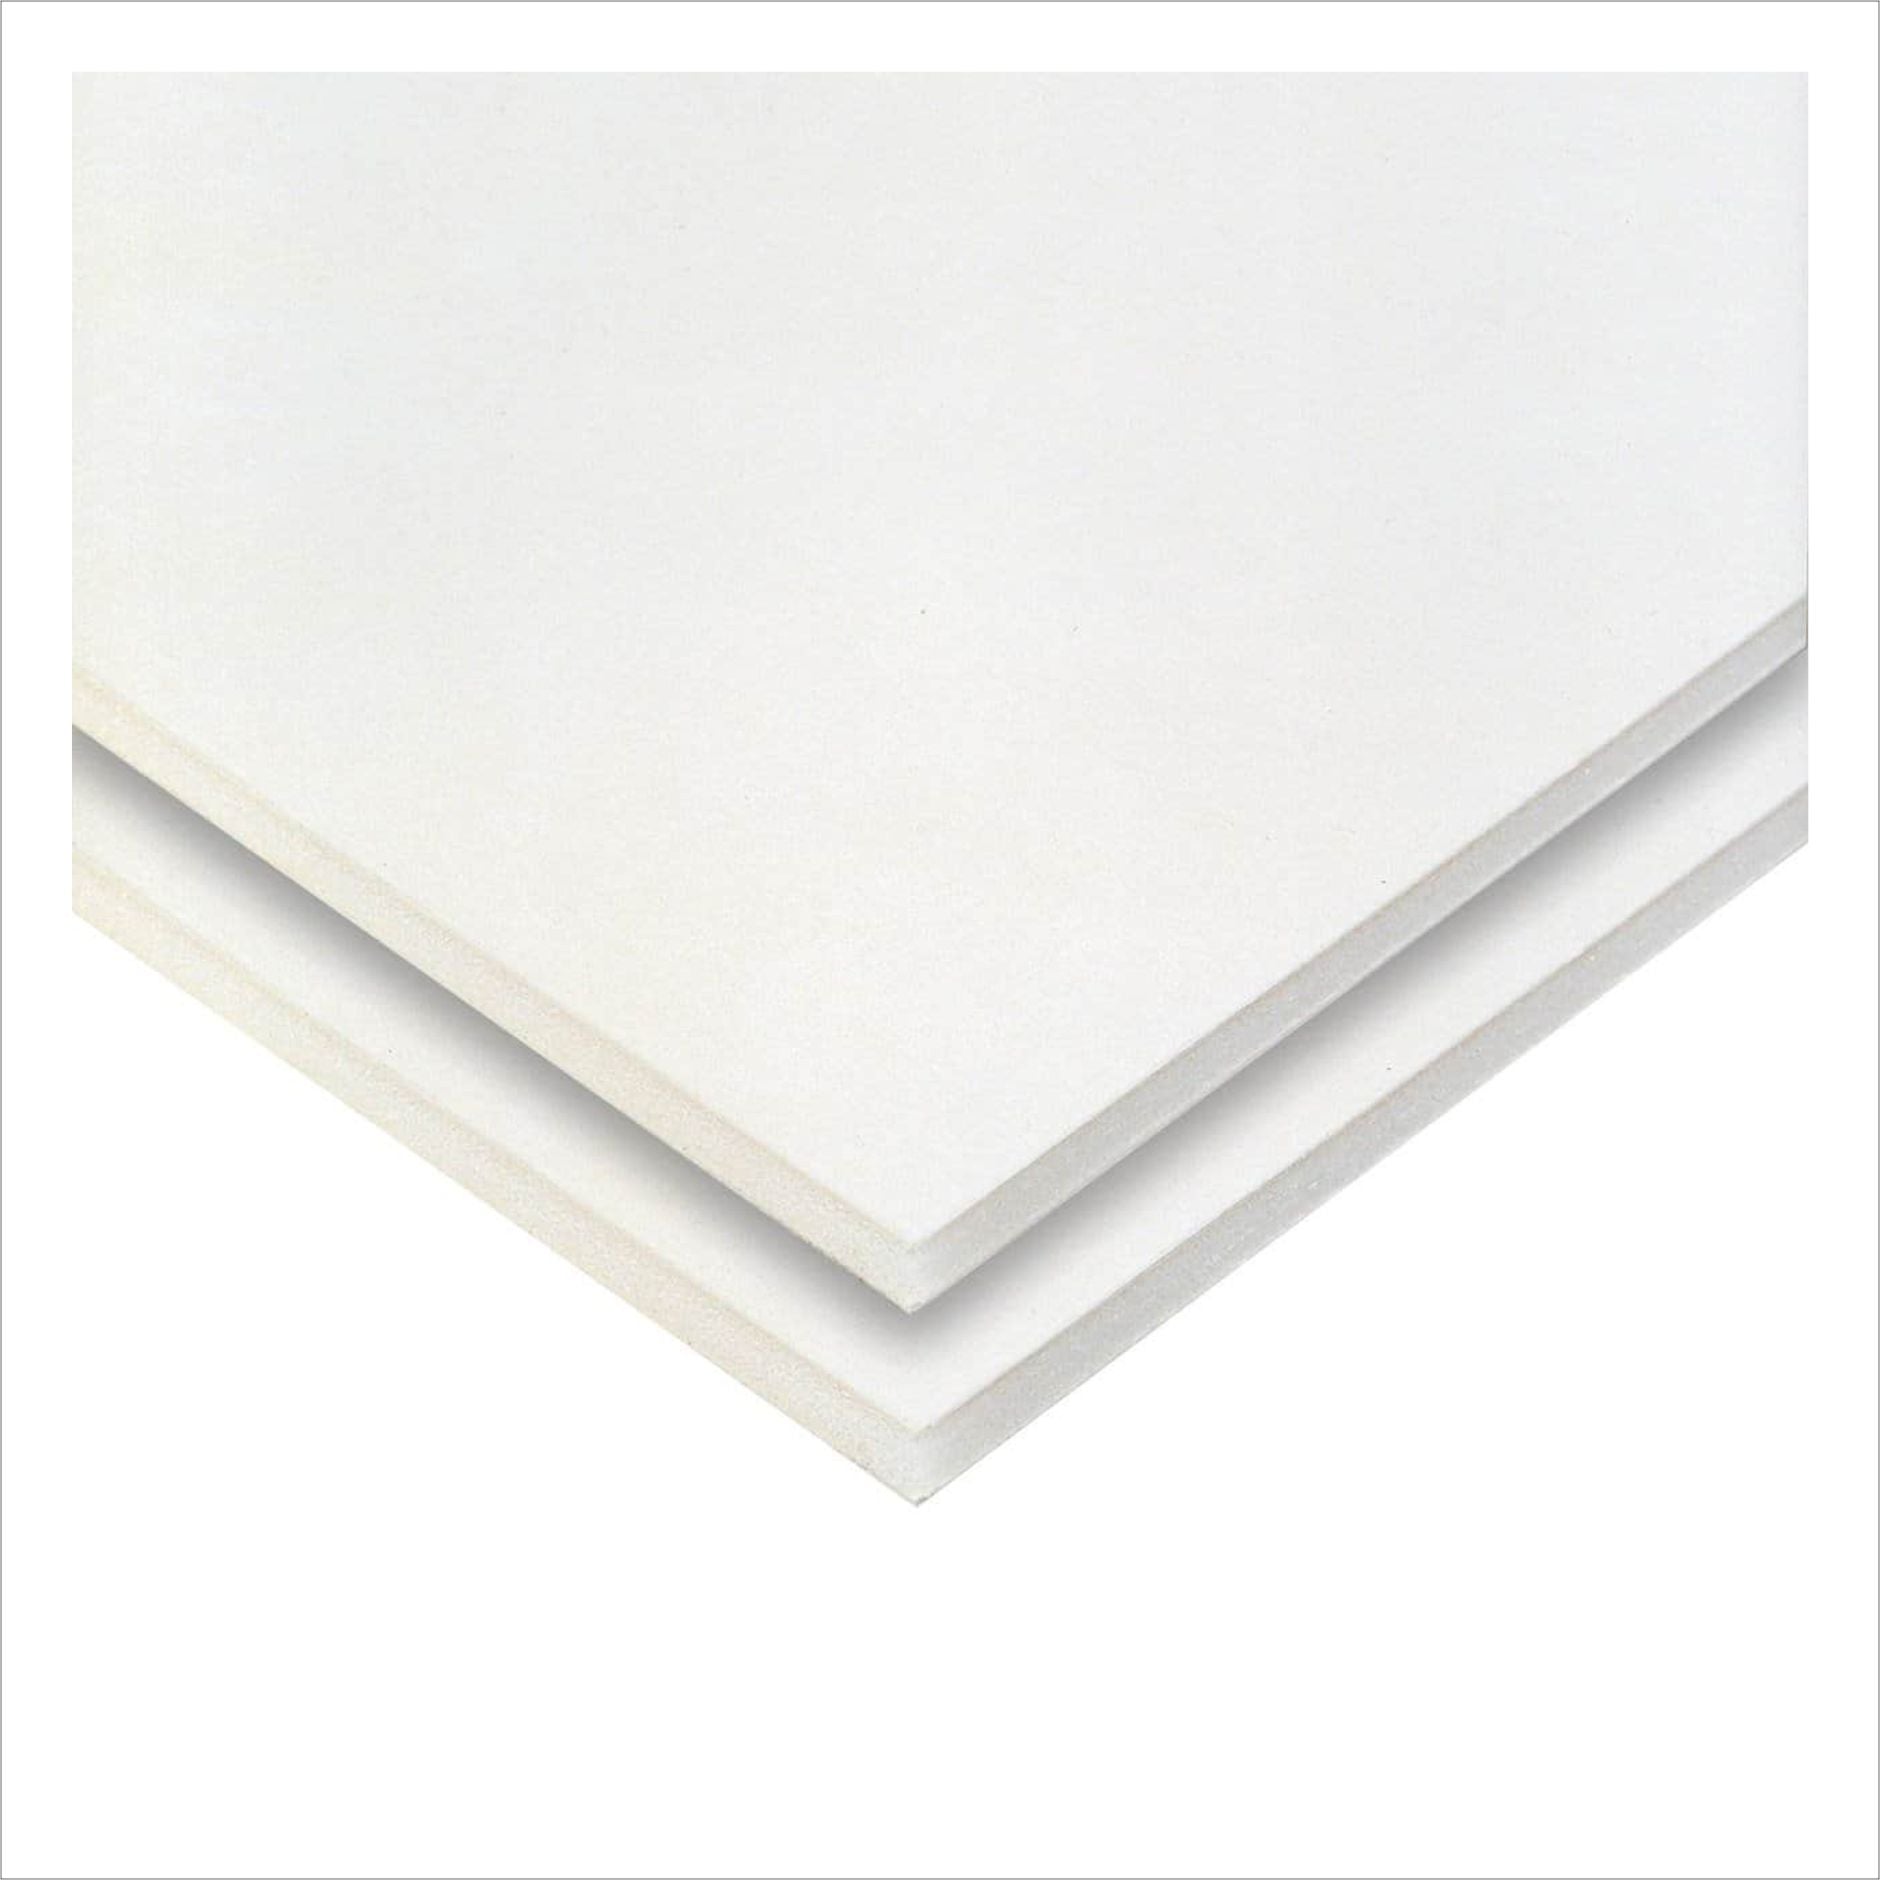 40 x 30 inch Foamcore sheet (5mm) - Picture Framer Perth